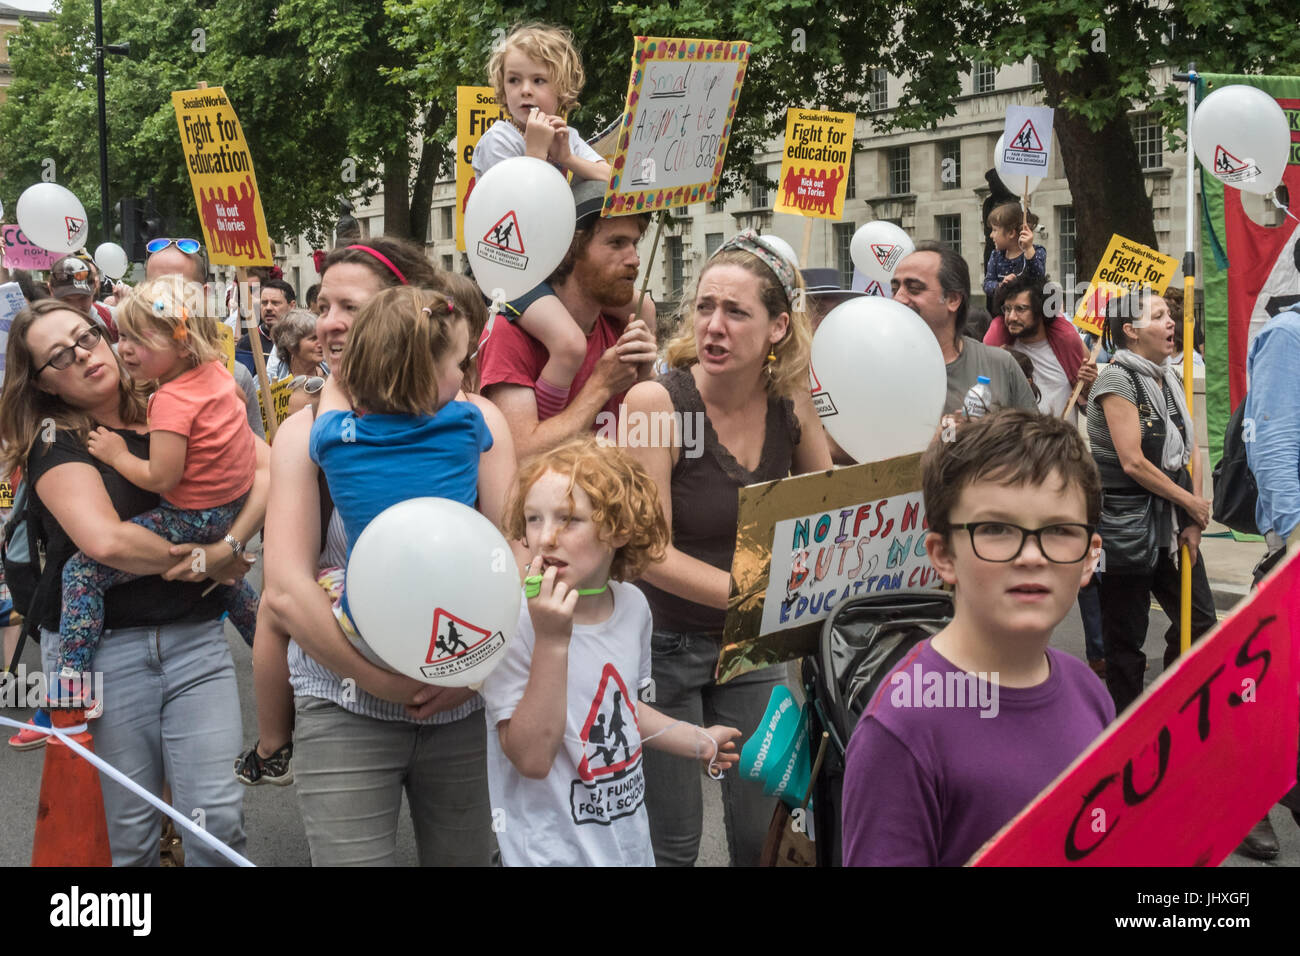 London, UK. 16th July 2017. Many of the hundreds of parents, children, teachers and others marching from Embankment to Parliament Square in a protest against unfair cuts in school funding shout loudly as they pass Downing St. The 'Carnival Against Cuts' was organised by parents in the 'Fair Funding for All Schools' campaign and supported by the NUT.  arly in the inner cities. Ca Credit: Peter Marshall/Alamy Live News Stock Photo